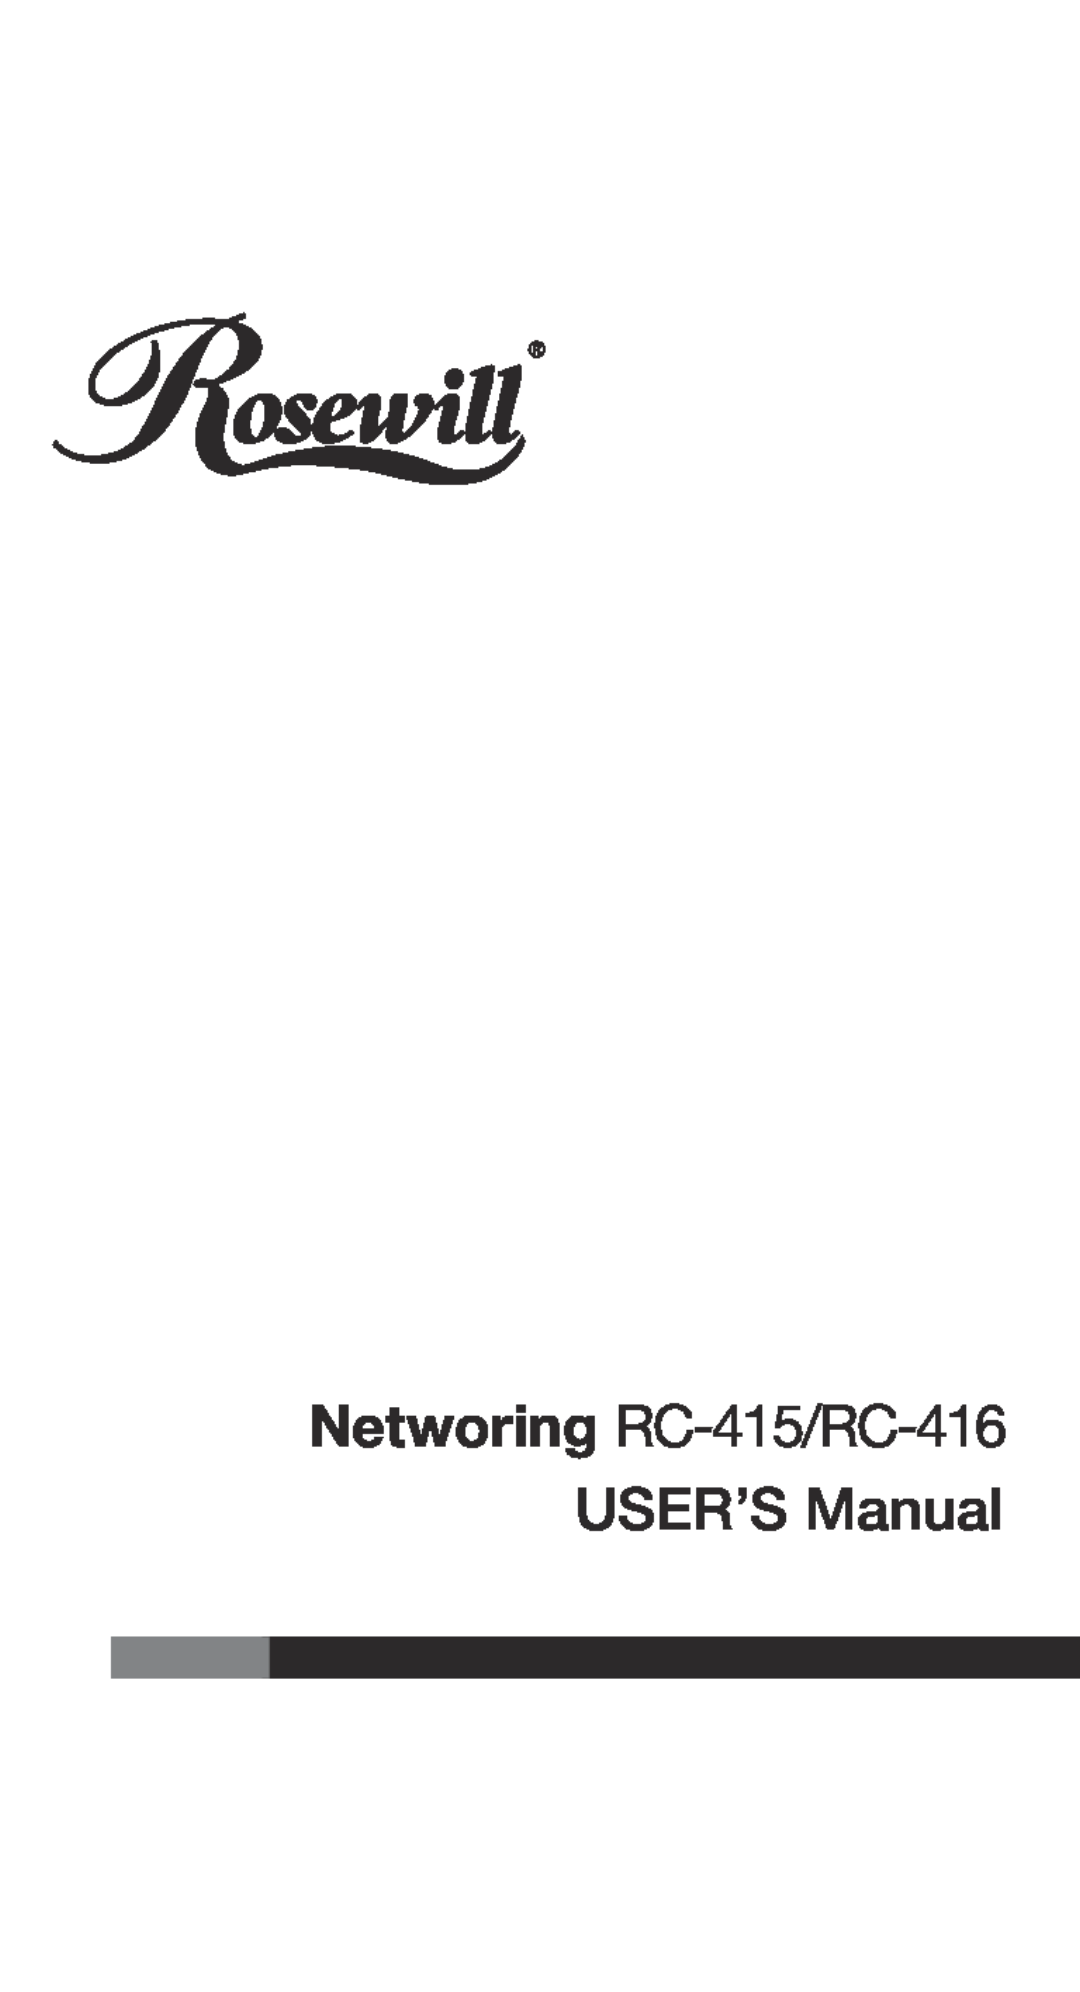 Rosewill user manual Networing RC-415/RC-416 USER’S Manual 